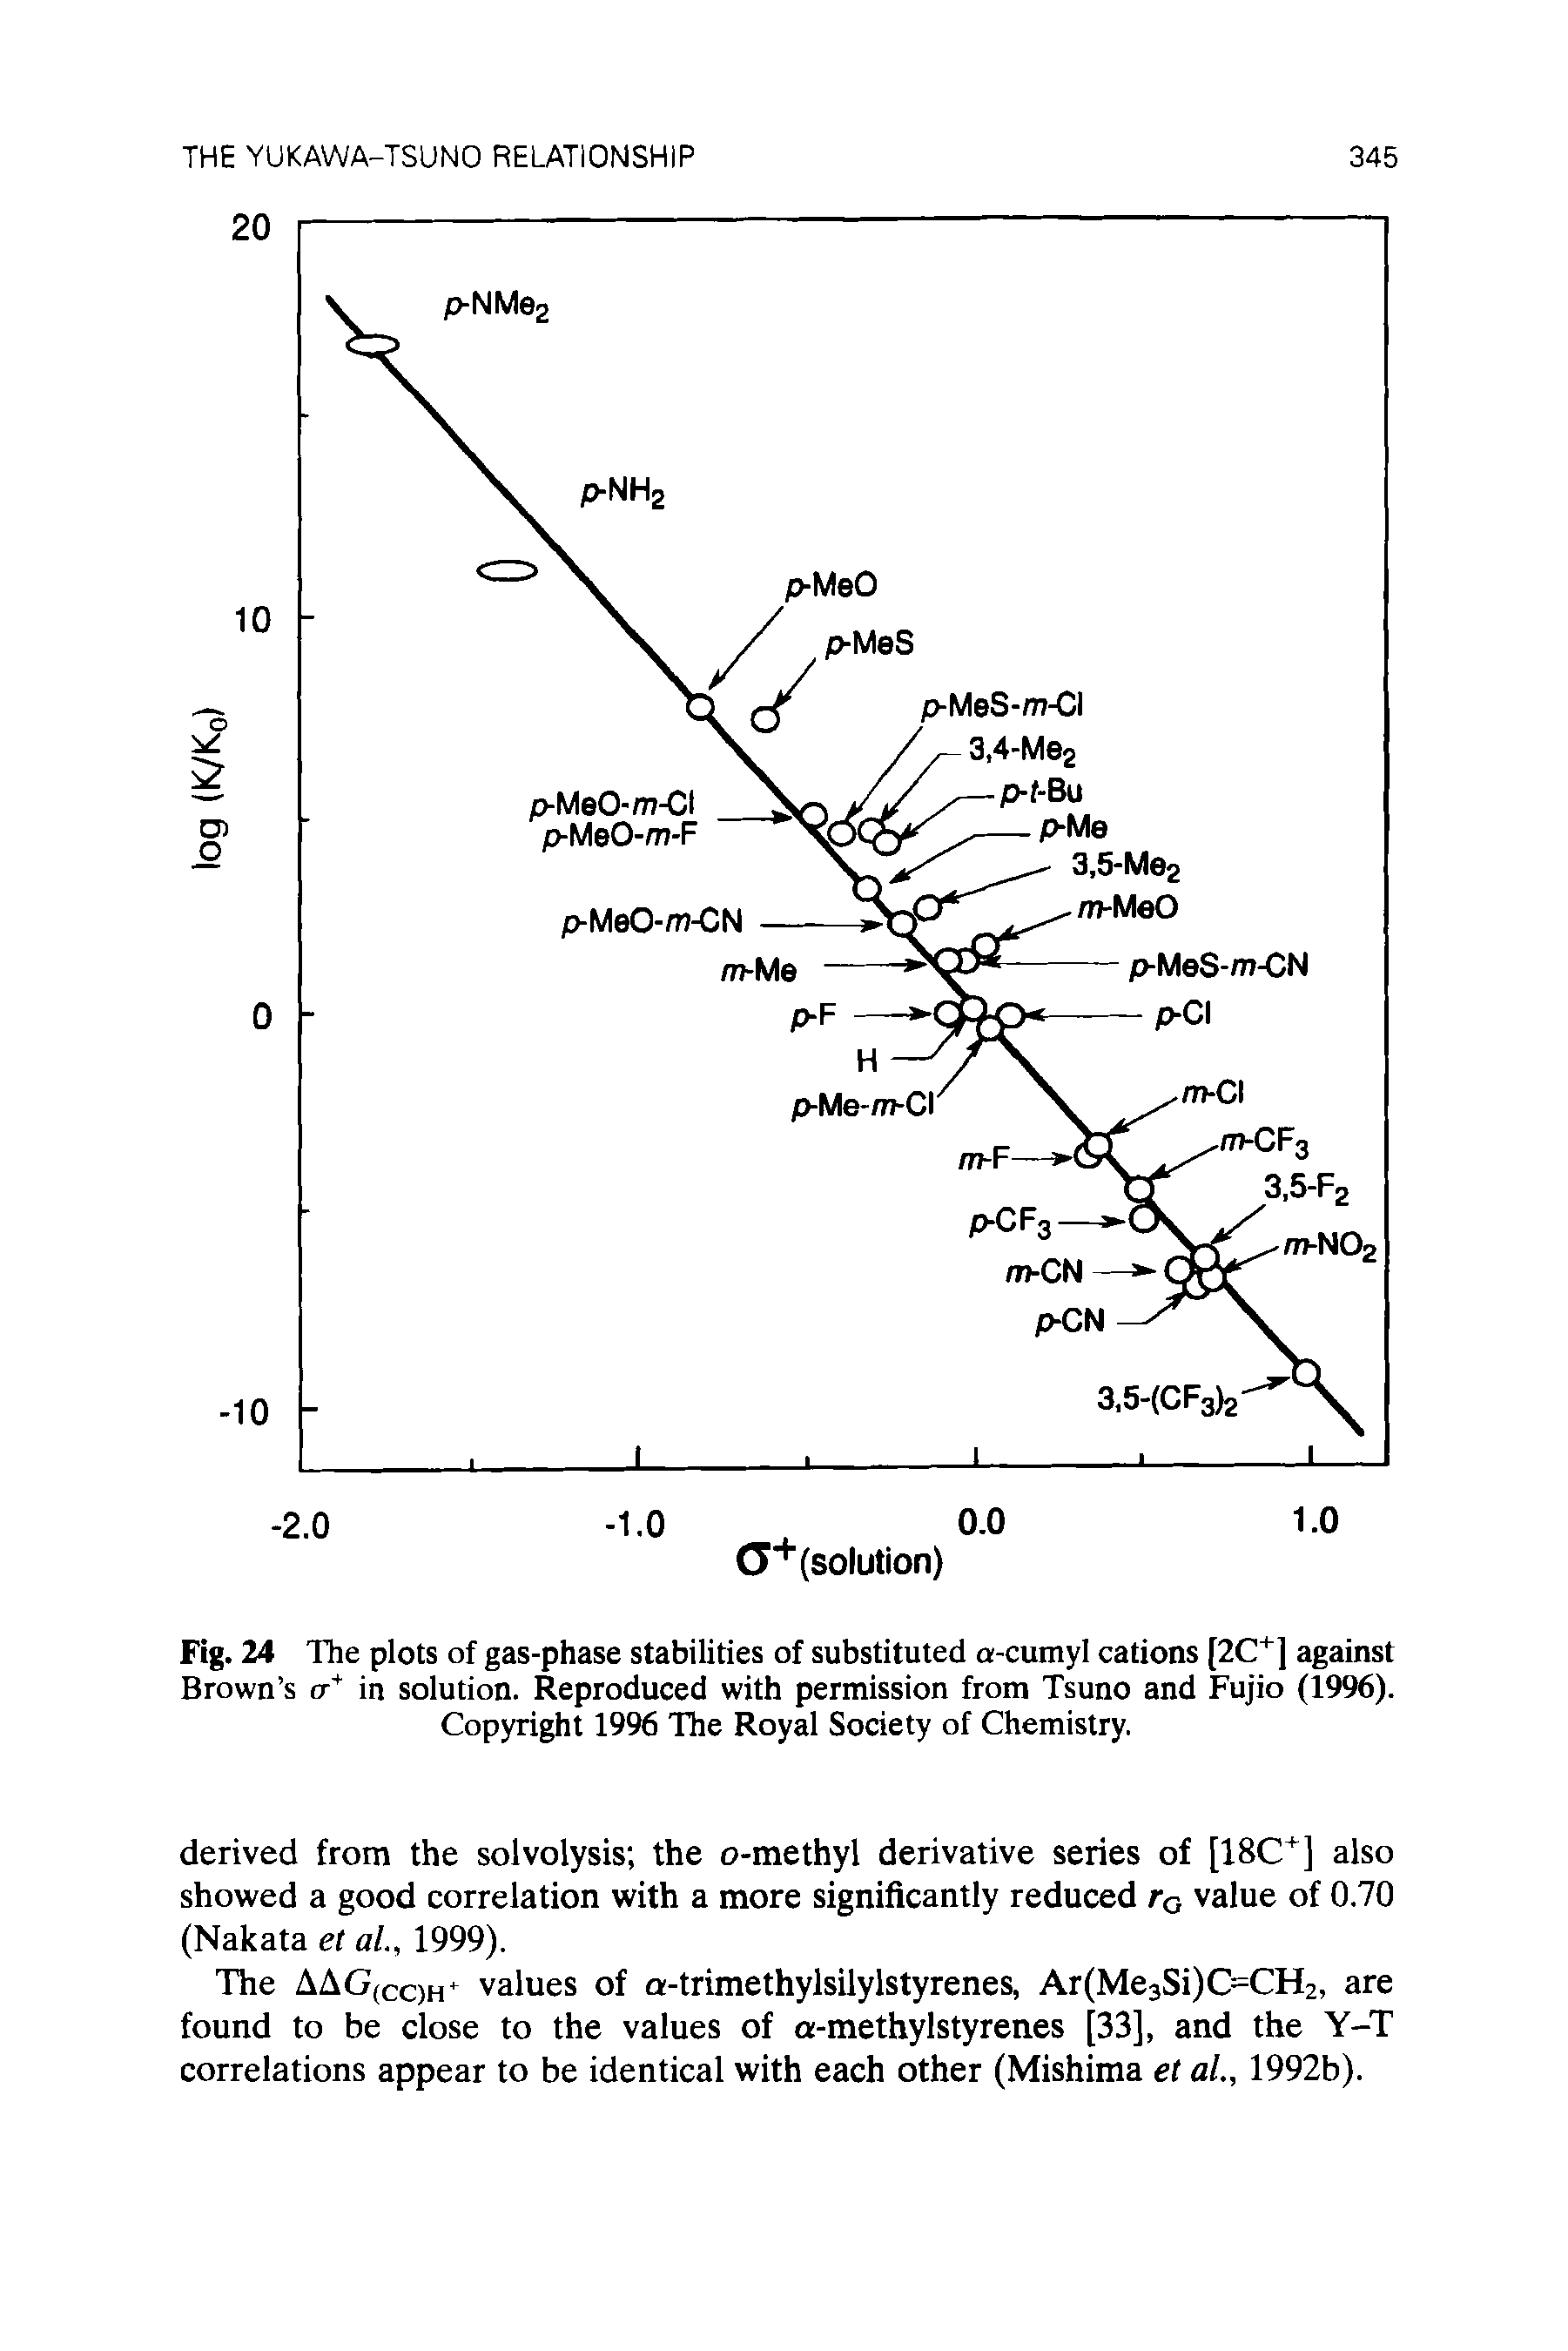 Fig. 24 The plots of gas-phase stabilities of substituted a-cumyl cations against Brown s cr in solution. Reproduced with permission from Tsuno and Fujio (1996). Copyright 1996 The Royal Society of Chemistry.